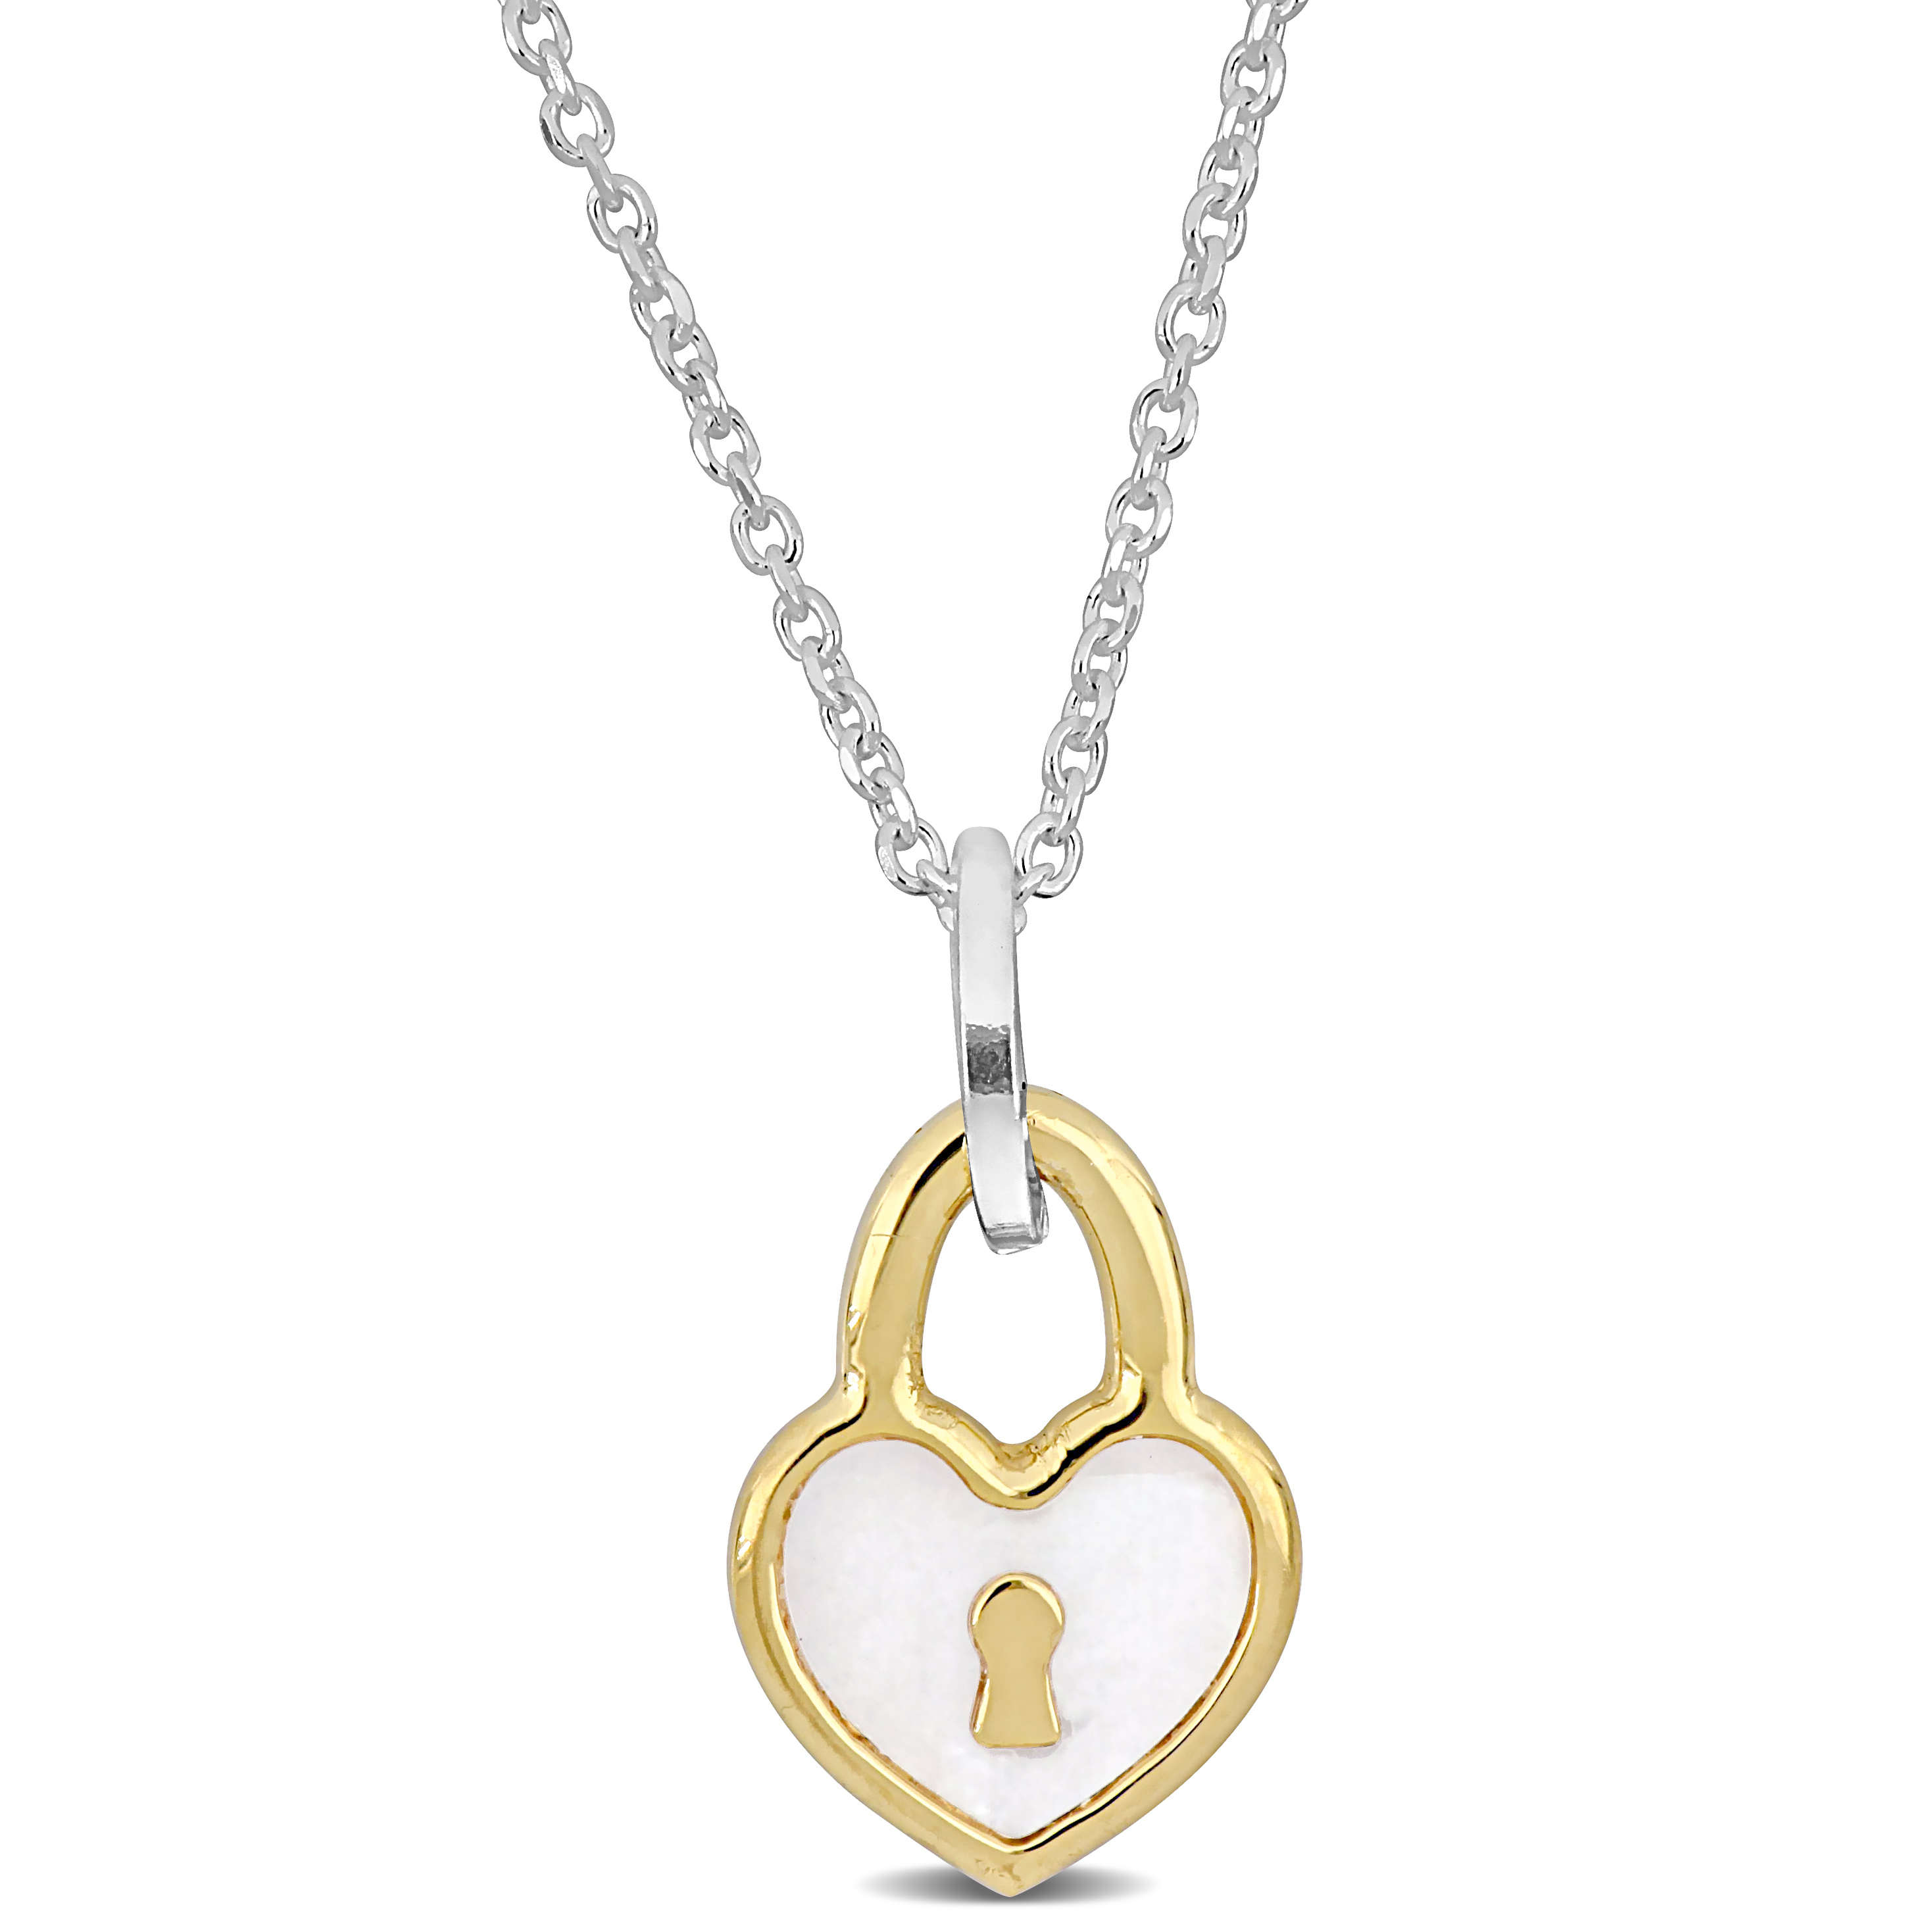 White and Yellow Heart Lock Charm Necklace w/ White Enamel in Sterling Silver - 16+2 in.